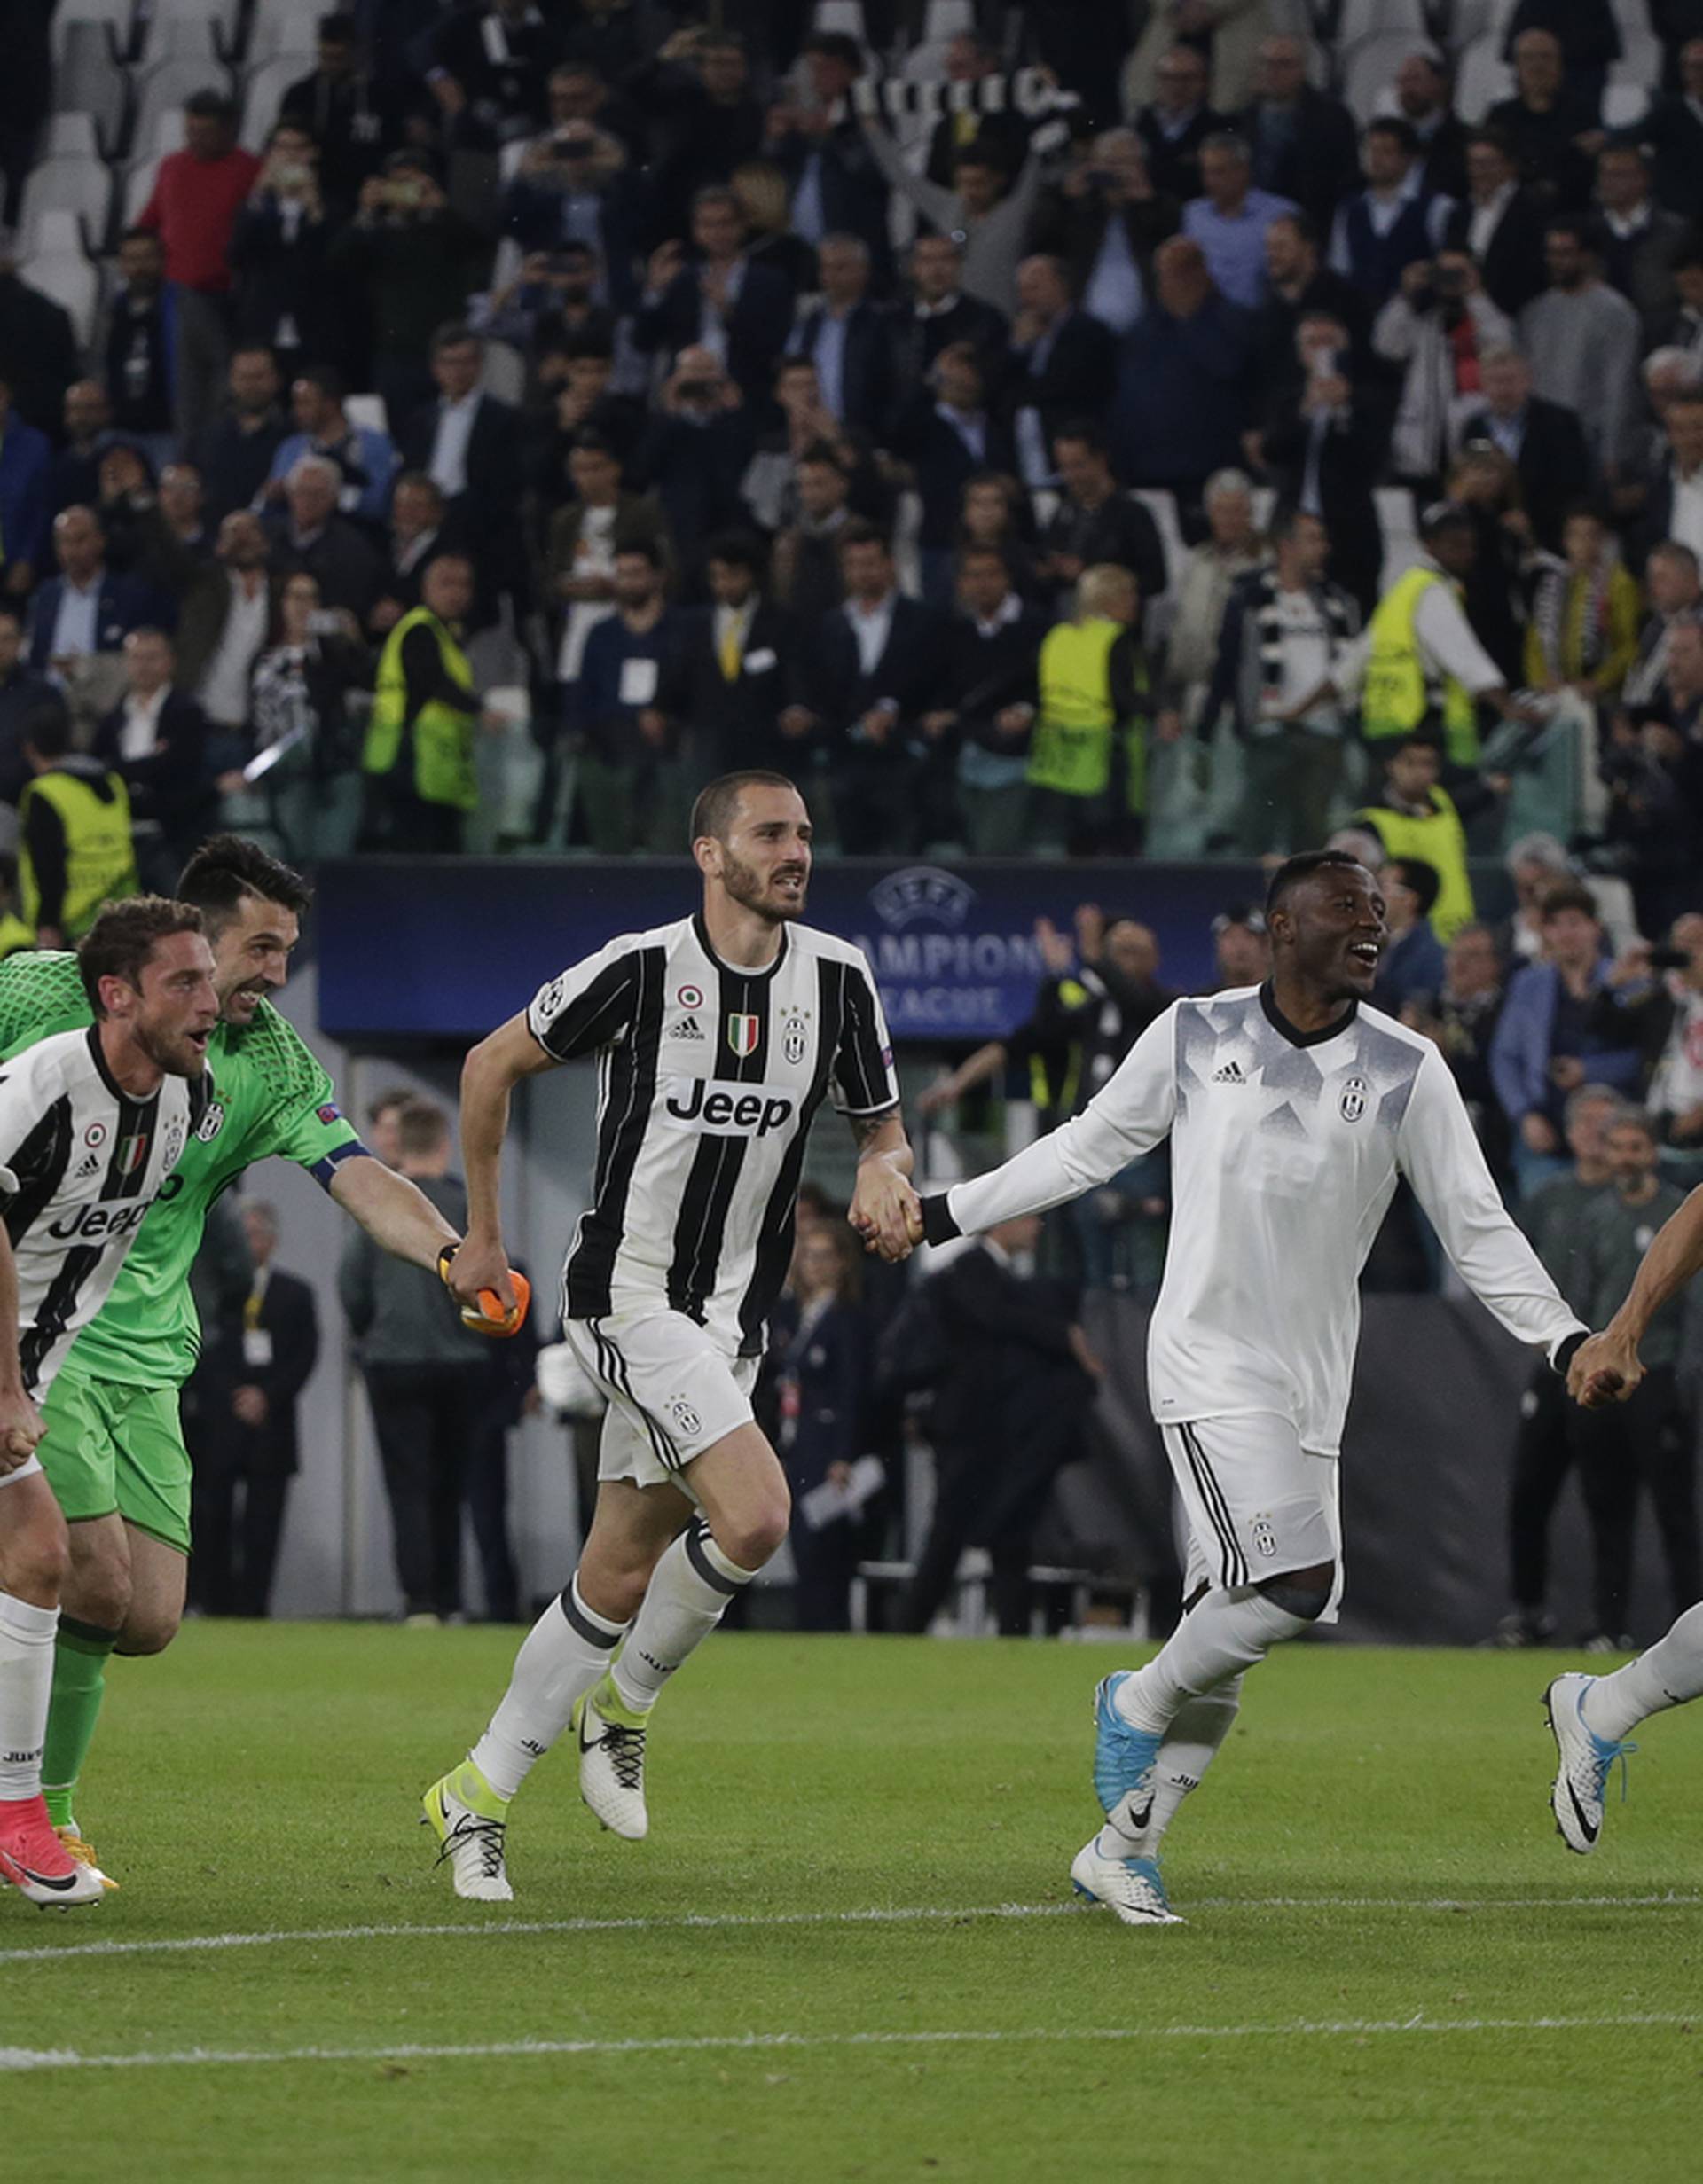 Juventus players celebrate after the match